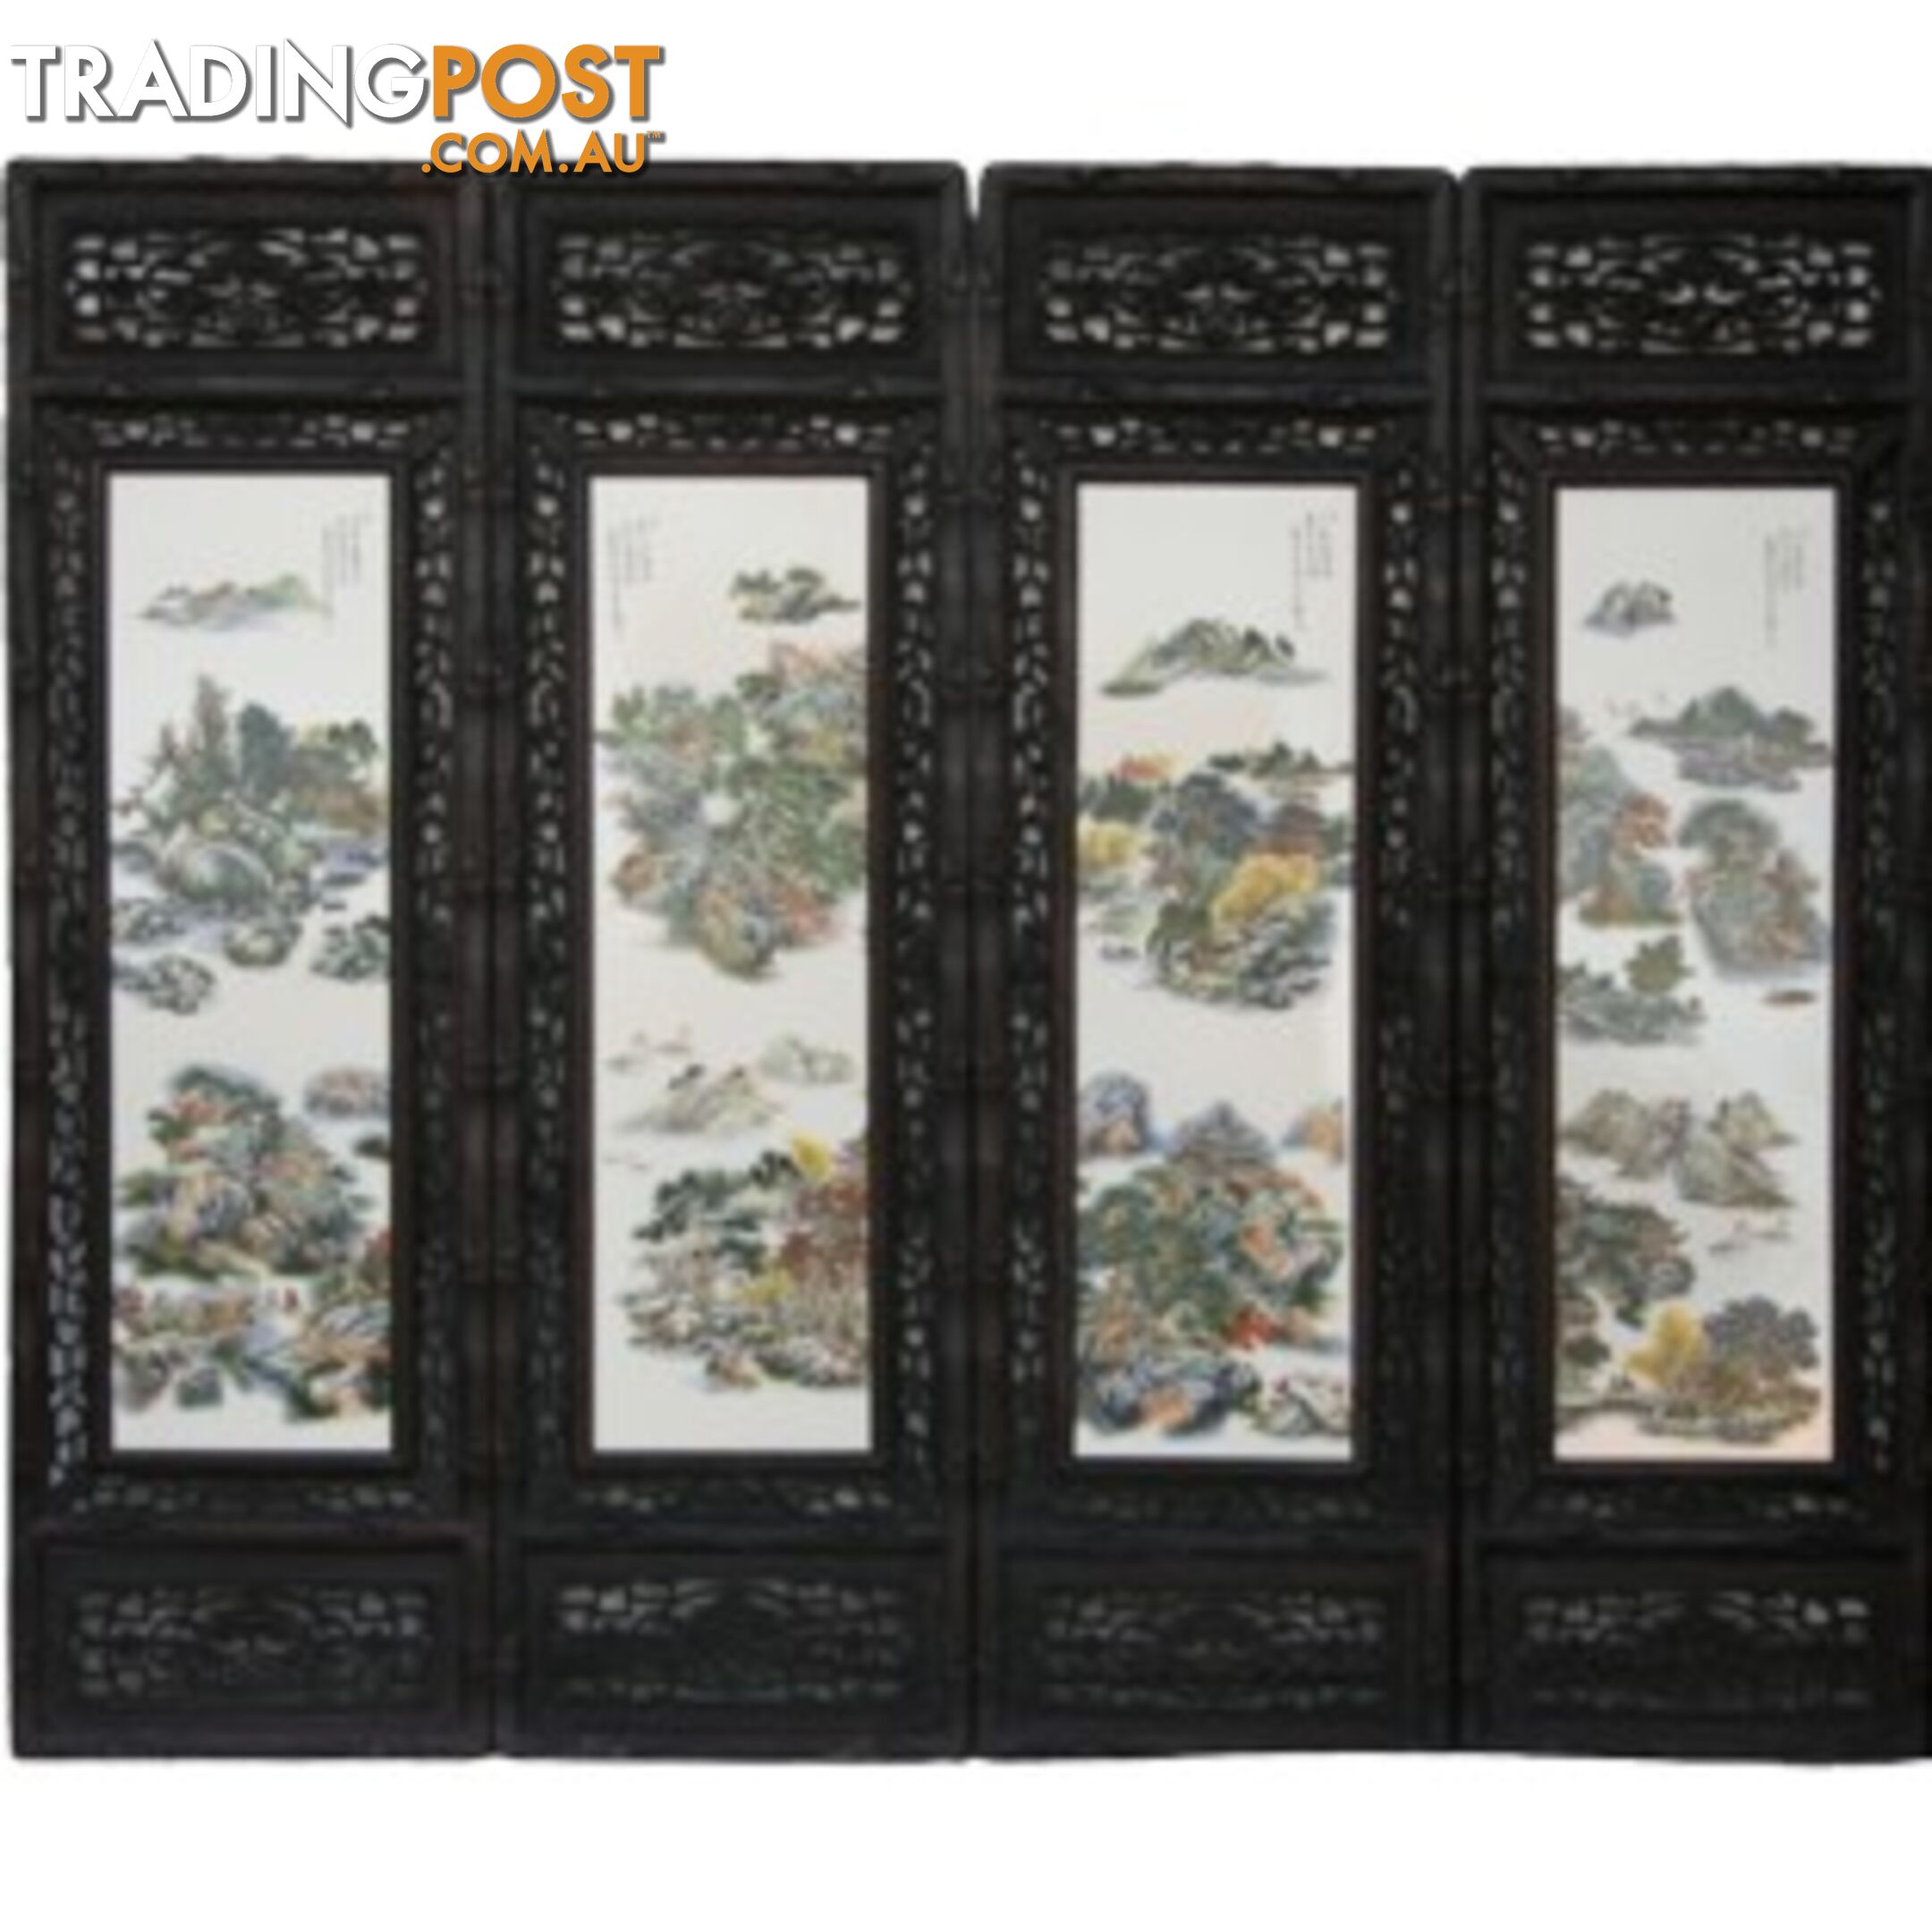 Chinese Wall Hanging Decoration-Carved Wood Panel w/Mountain Scene Porcelain Insert